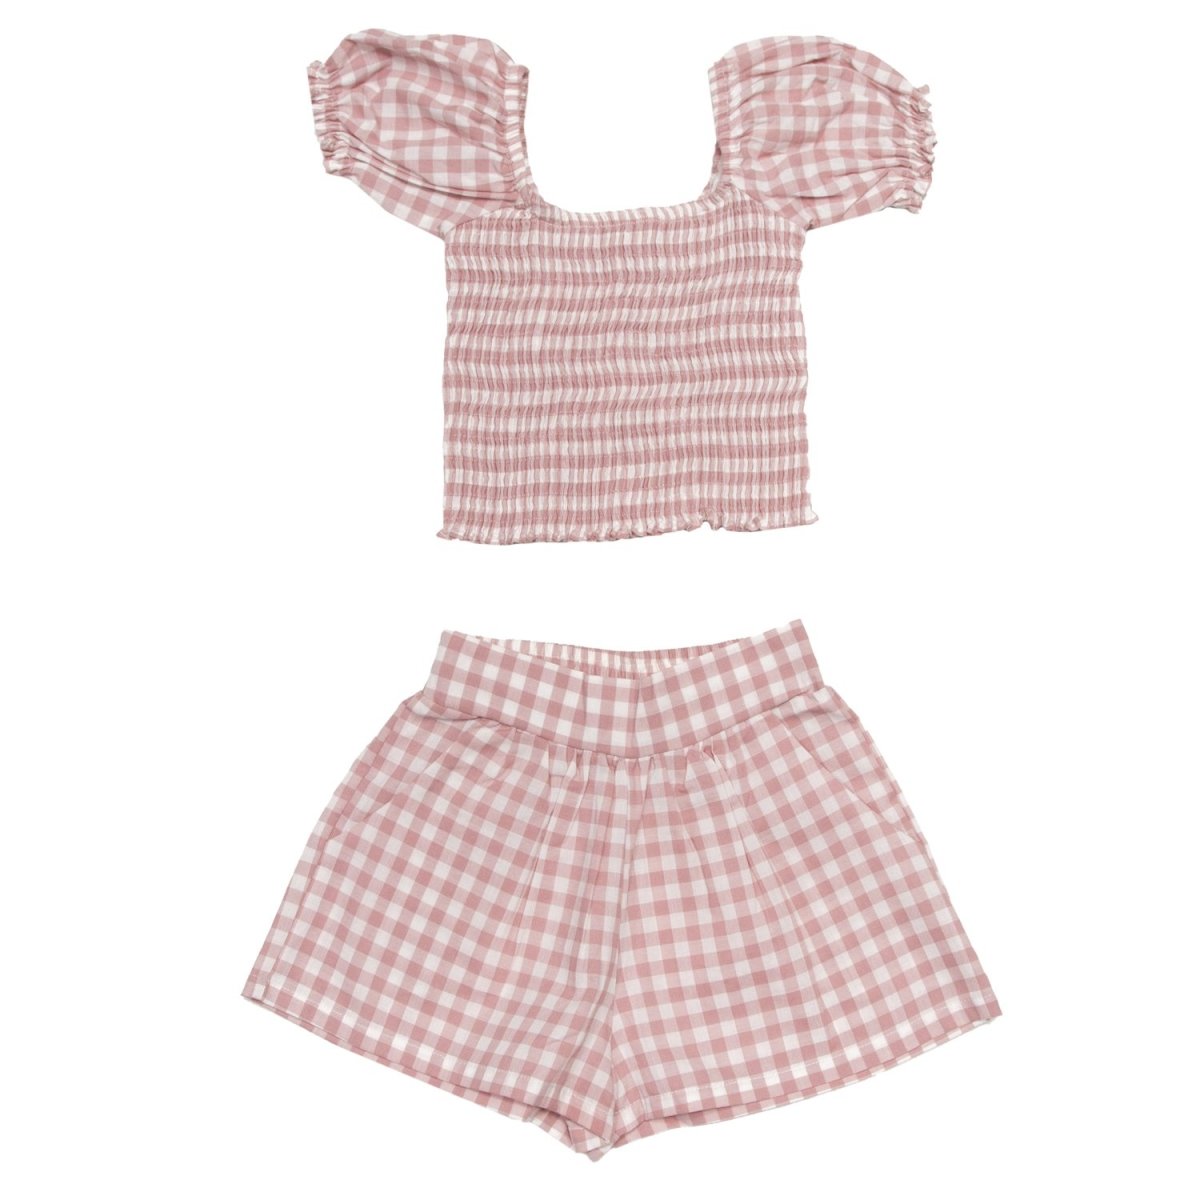 IVY GINGHAM TOP AND SHORTS SET - SET